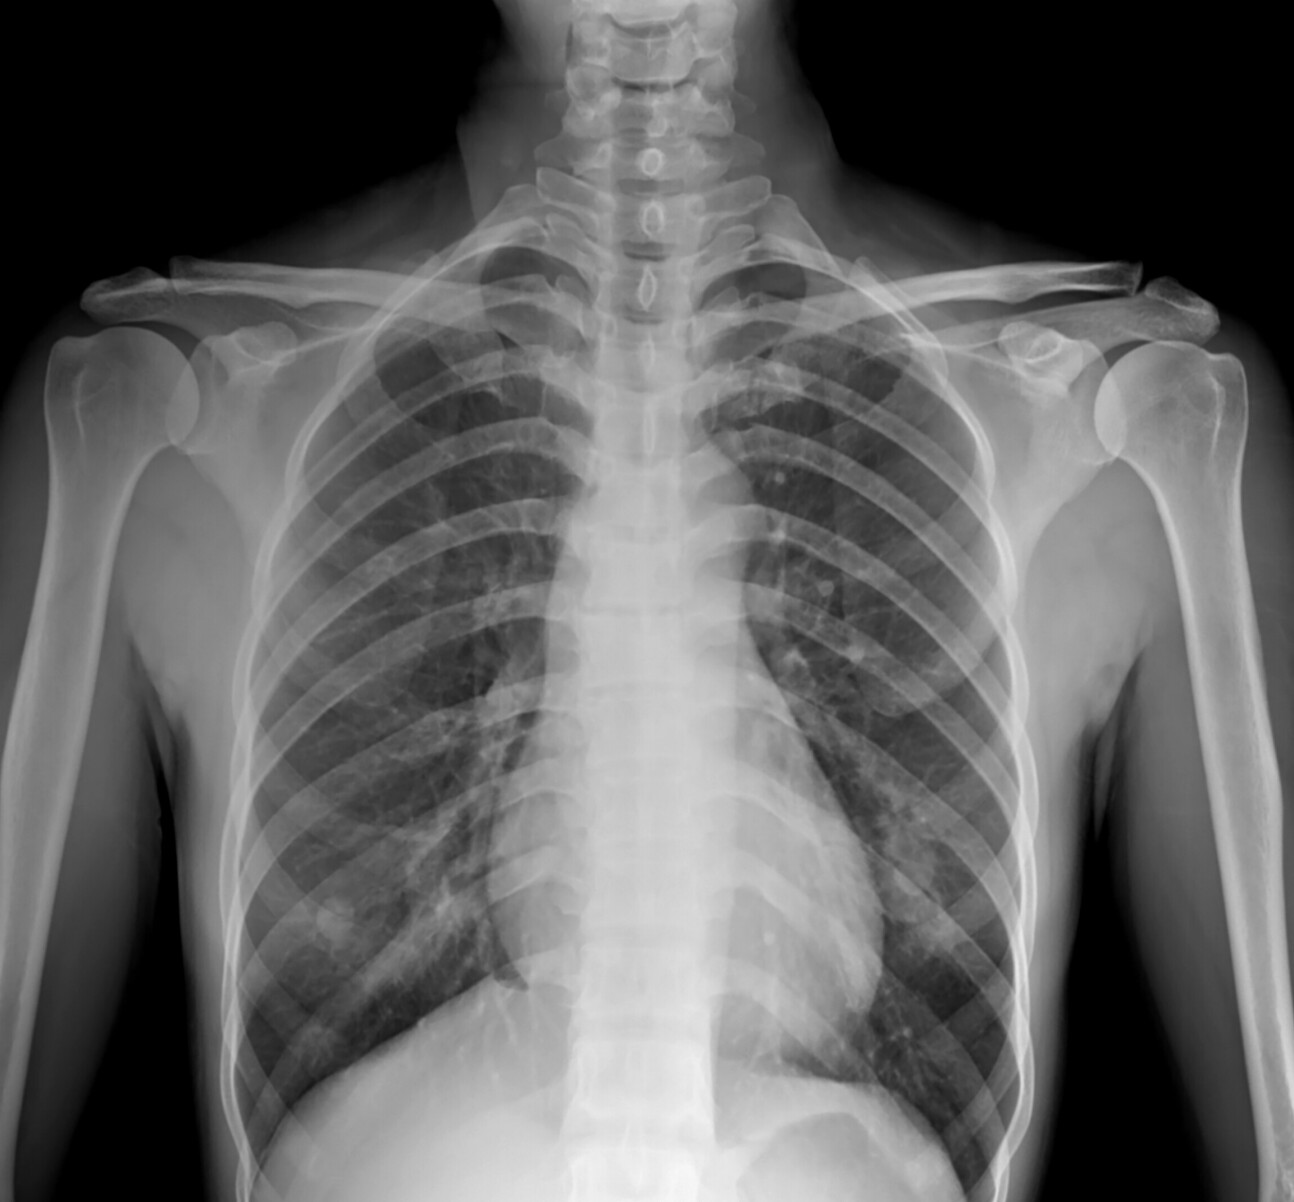 An X-ray image of a human chest